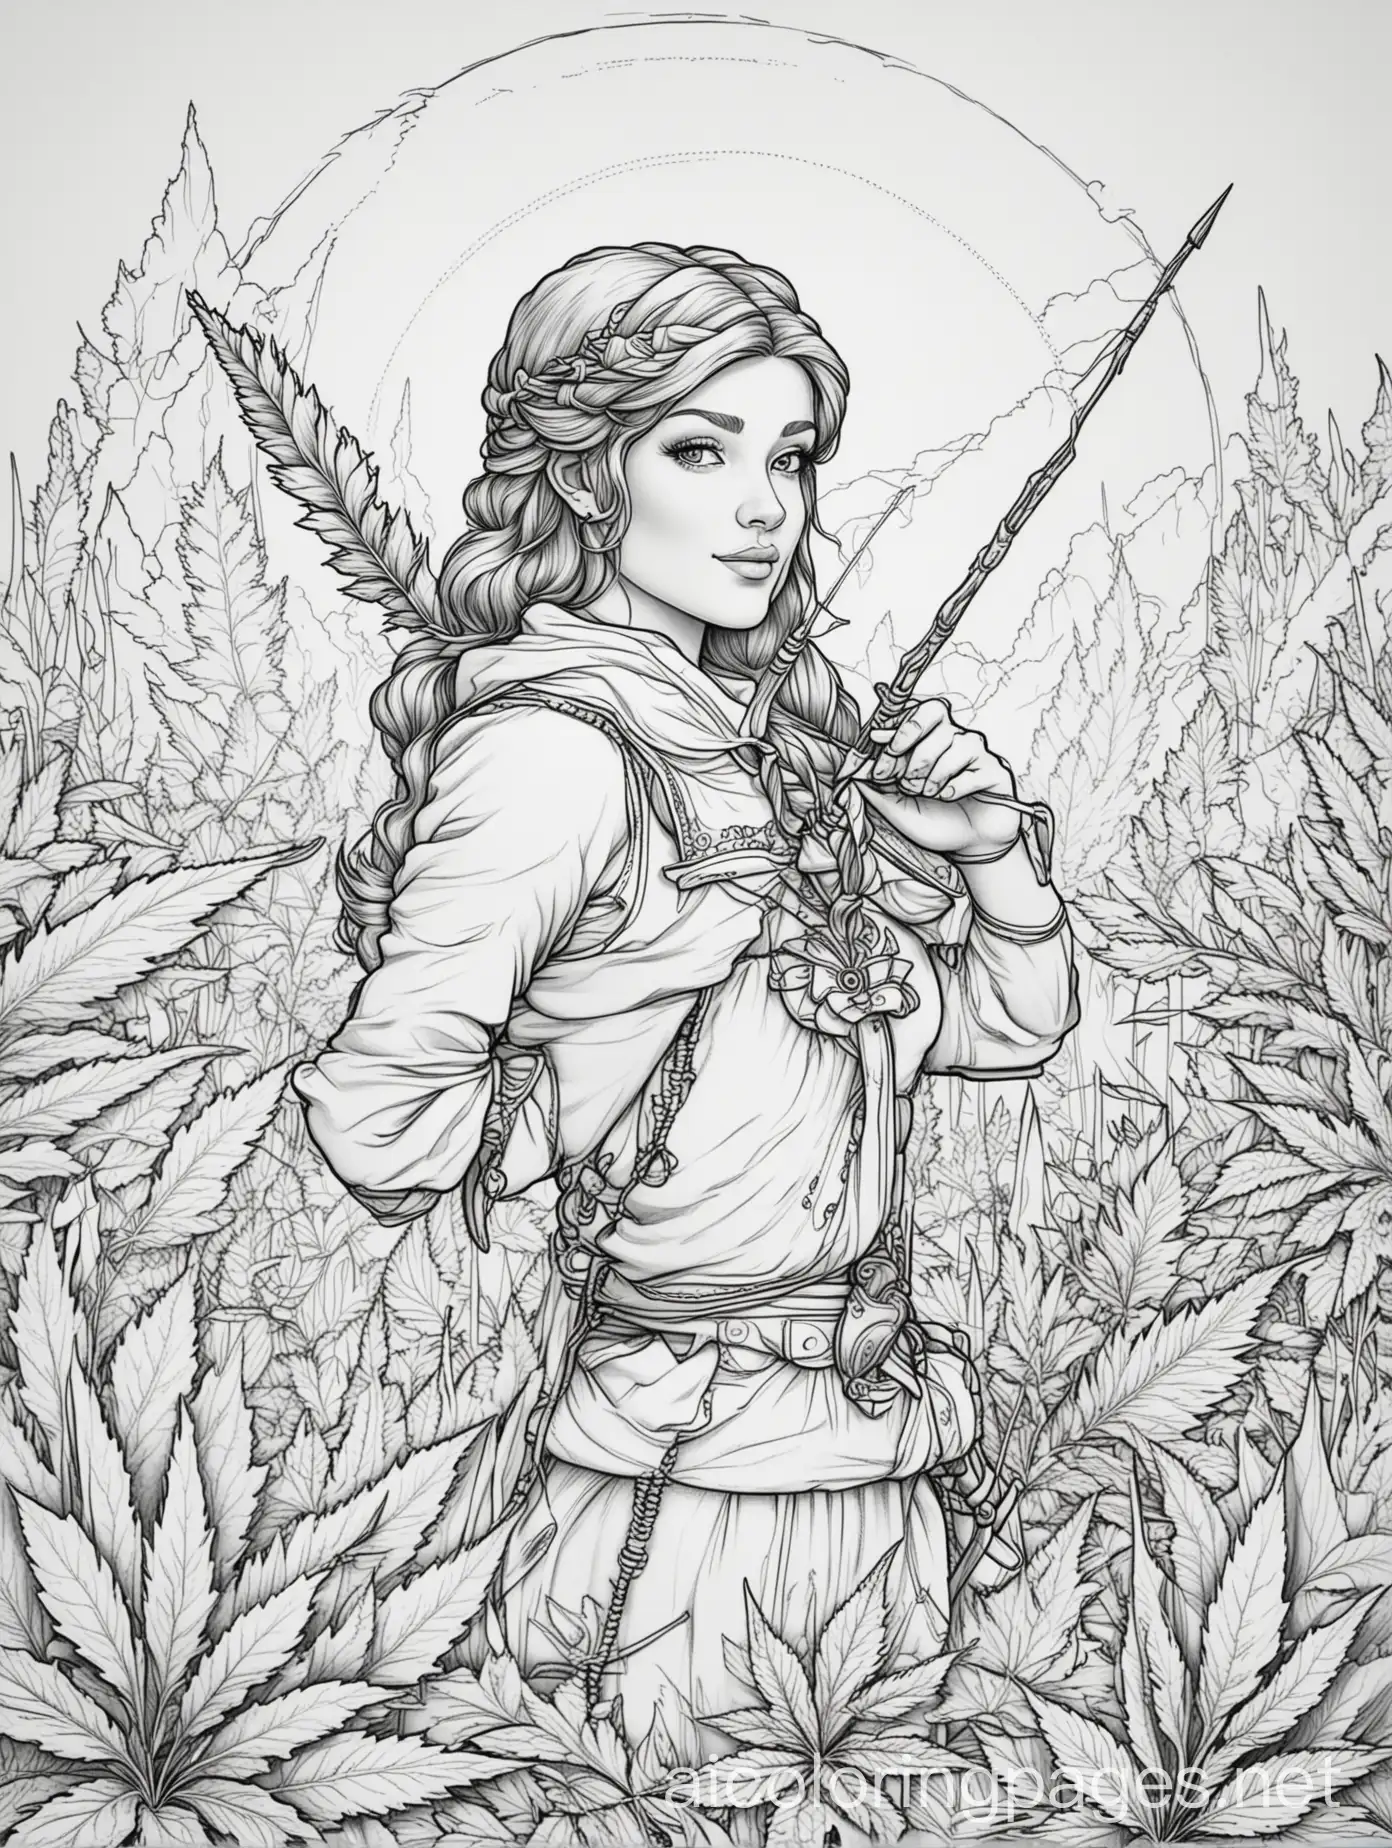 Archer cannabis fantasy, Coloring Page, black and white, line art, white background, Simplicity, Ample White Space. The background of the coloring page is plain white to make it easy for young children to color within the lines. The outlines of all the subjects are easy to distinguish, making it simple for kids to color without too much difficulty